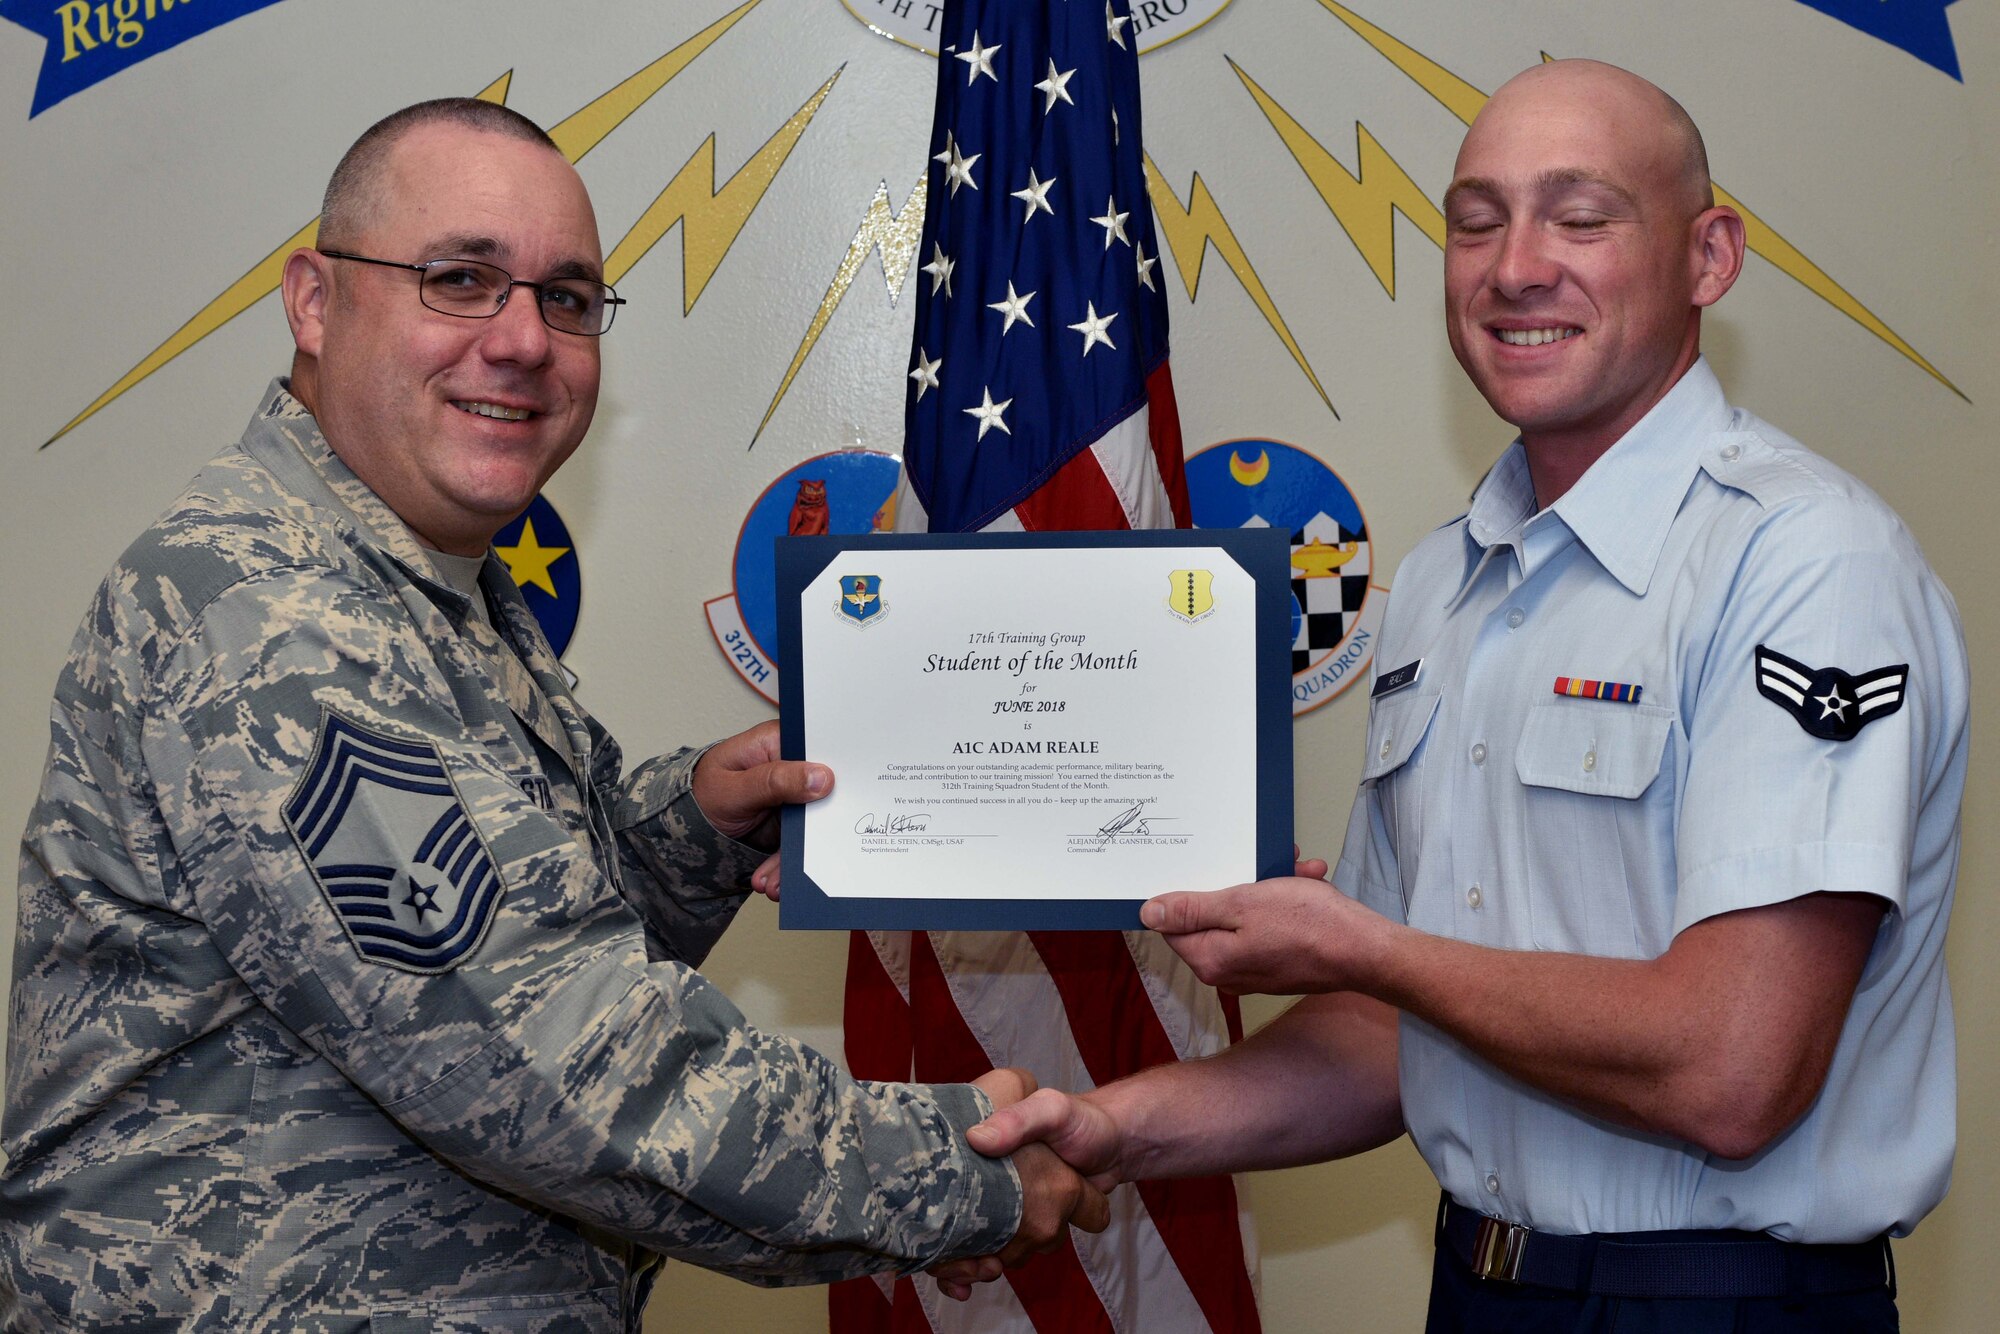 U.S. Air Force Chief Master Sgt. Daniel Stein, 17th Training Group superintendent, presents the 312th Training Squadron Student of the Month award to Airman 1st Class Adam Reale, 312th TRS trainee, at Brandenburg Hall on Goodfellow Air Force Base, Texas, July 6, 2018. The 312th TRS’s mission is to provide Department of Defense and international customers with mission ready fire protection and special instruments graduates and provide mission support for the Air Force Technical Applications Center. (U.S. Air Force photo by Senior Airman Randall Moose/Released)